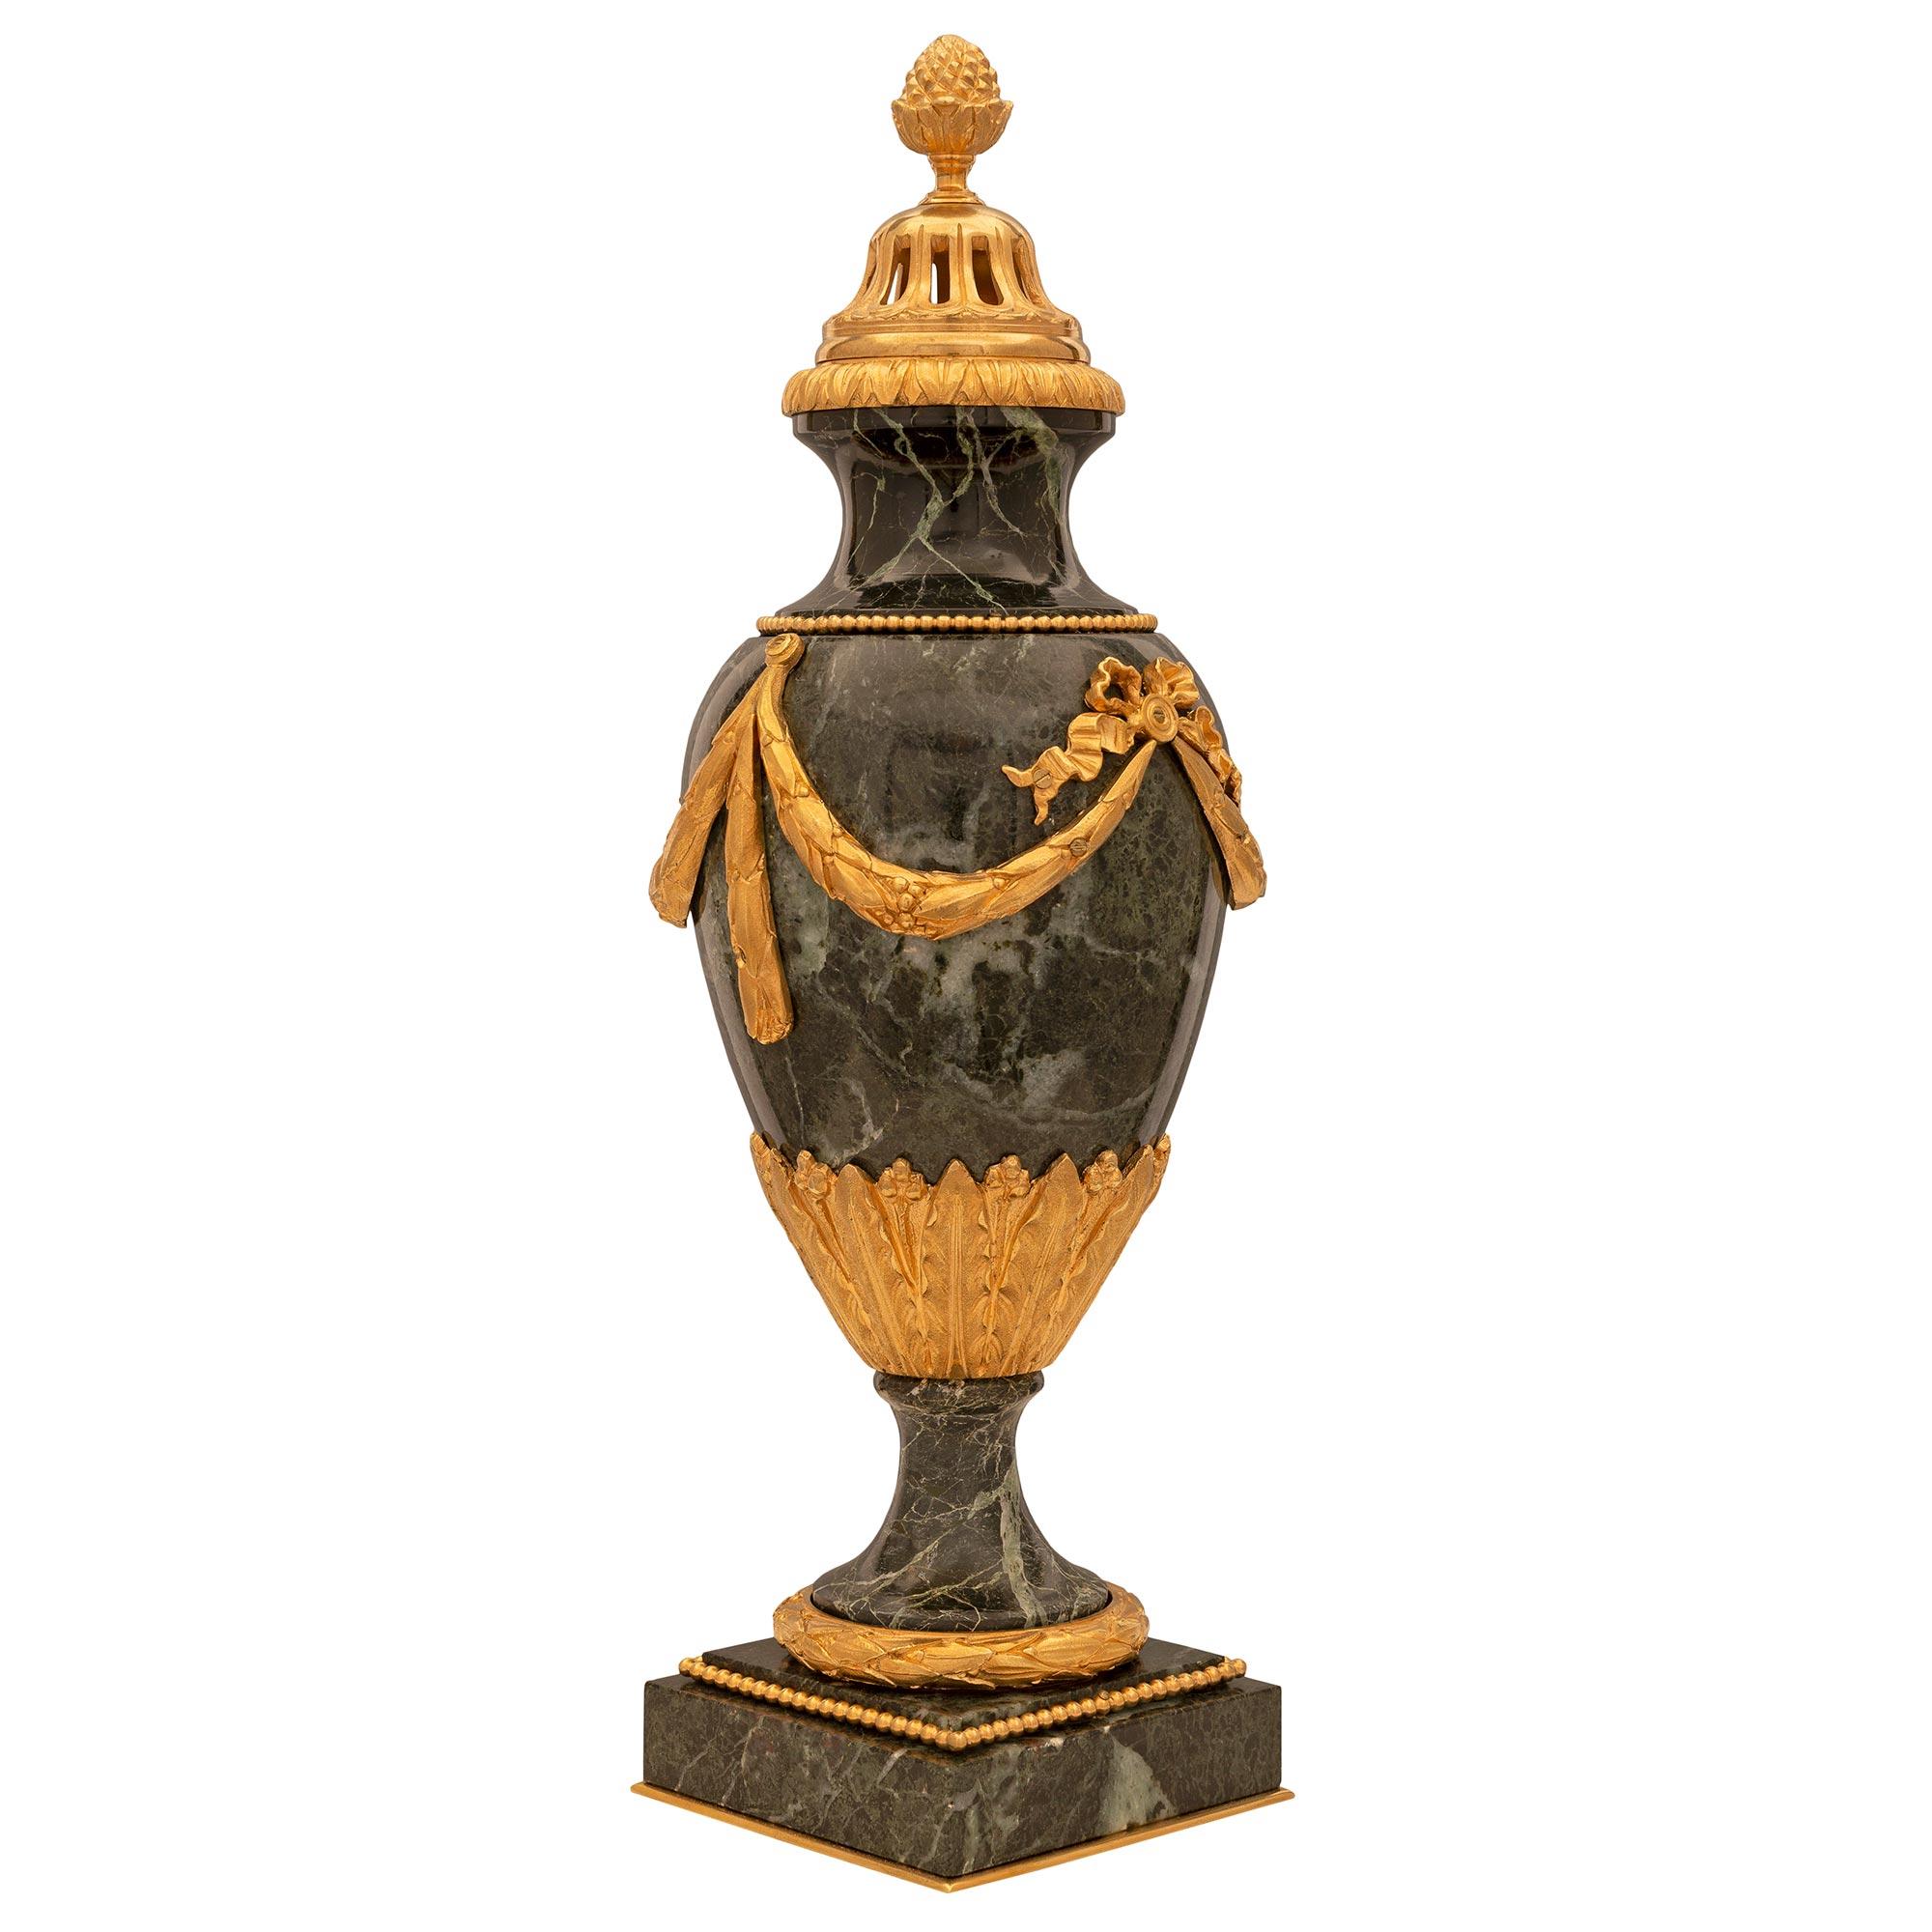 Pair of French 19th Century Louis XVI Style Marble and Ormolu Lidded Urns In Good Condition For Sale In West Palm Beach, FL